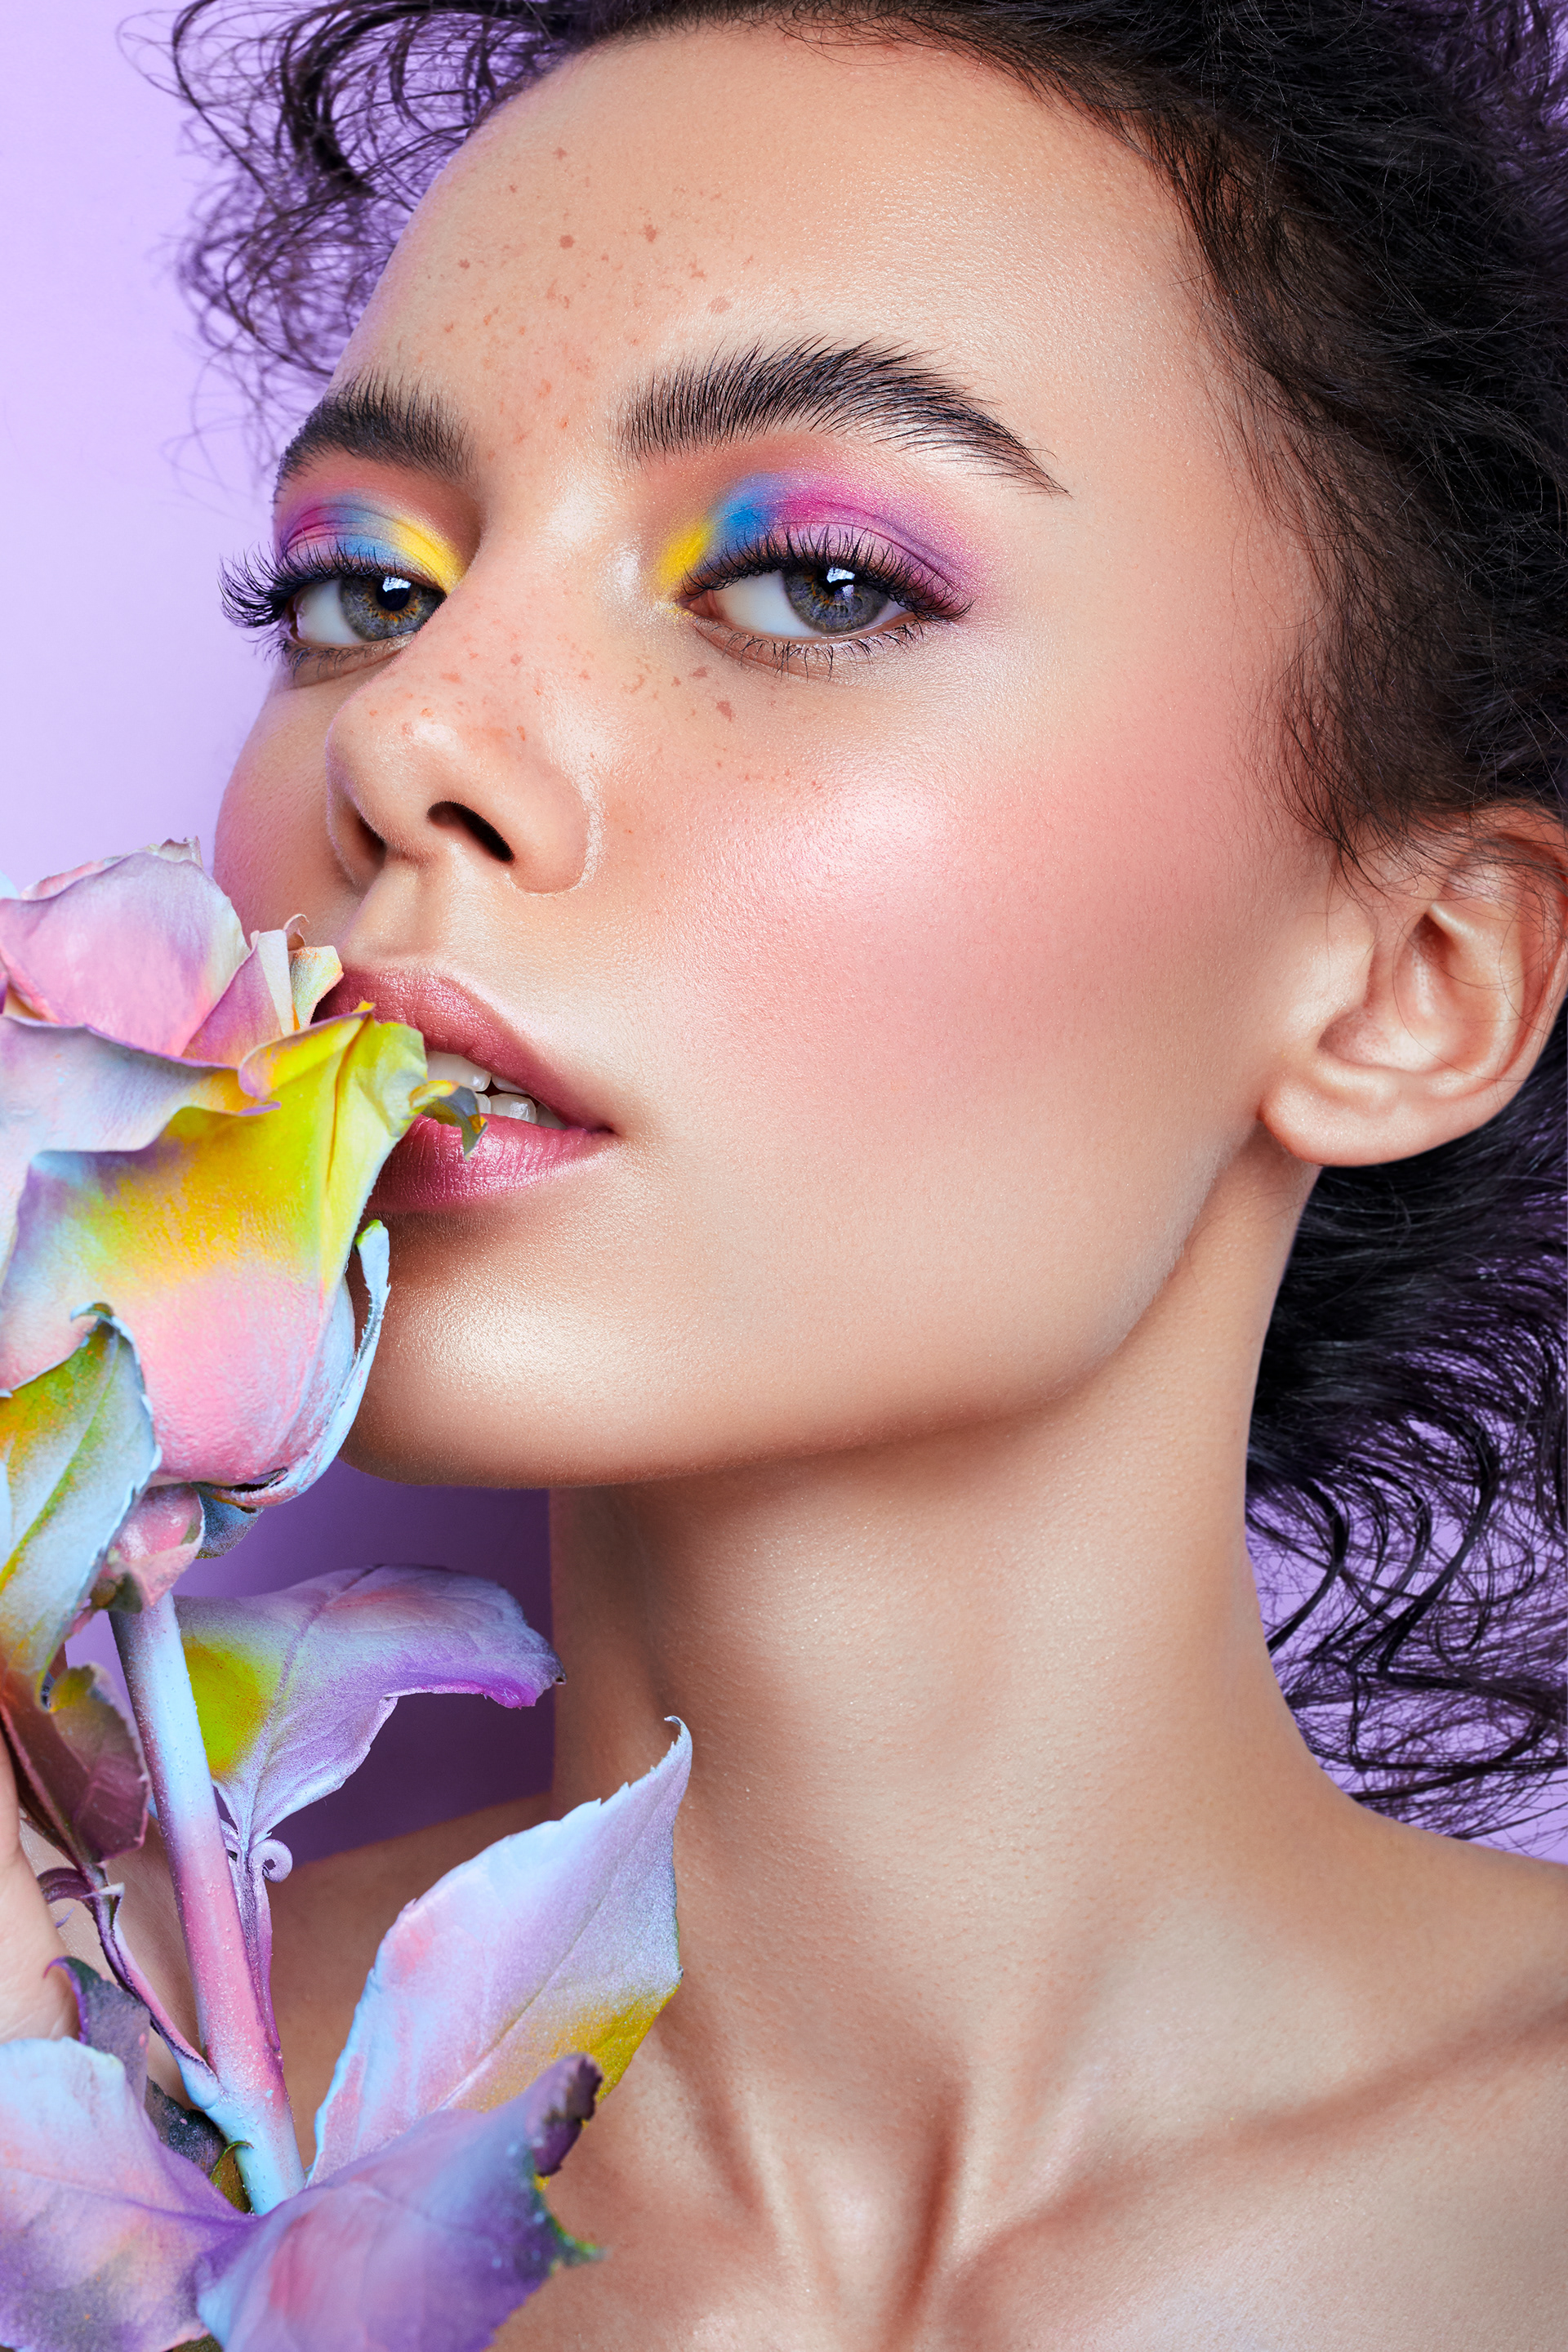 People 1920x2880 women women indoors makeup glamour fashion portrait flowers simple background colorful